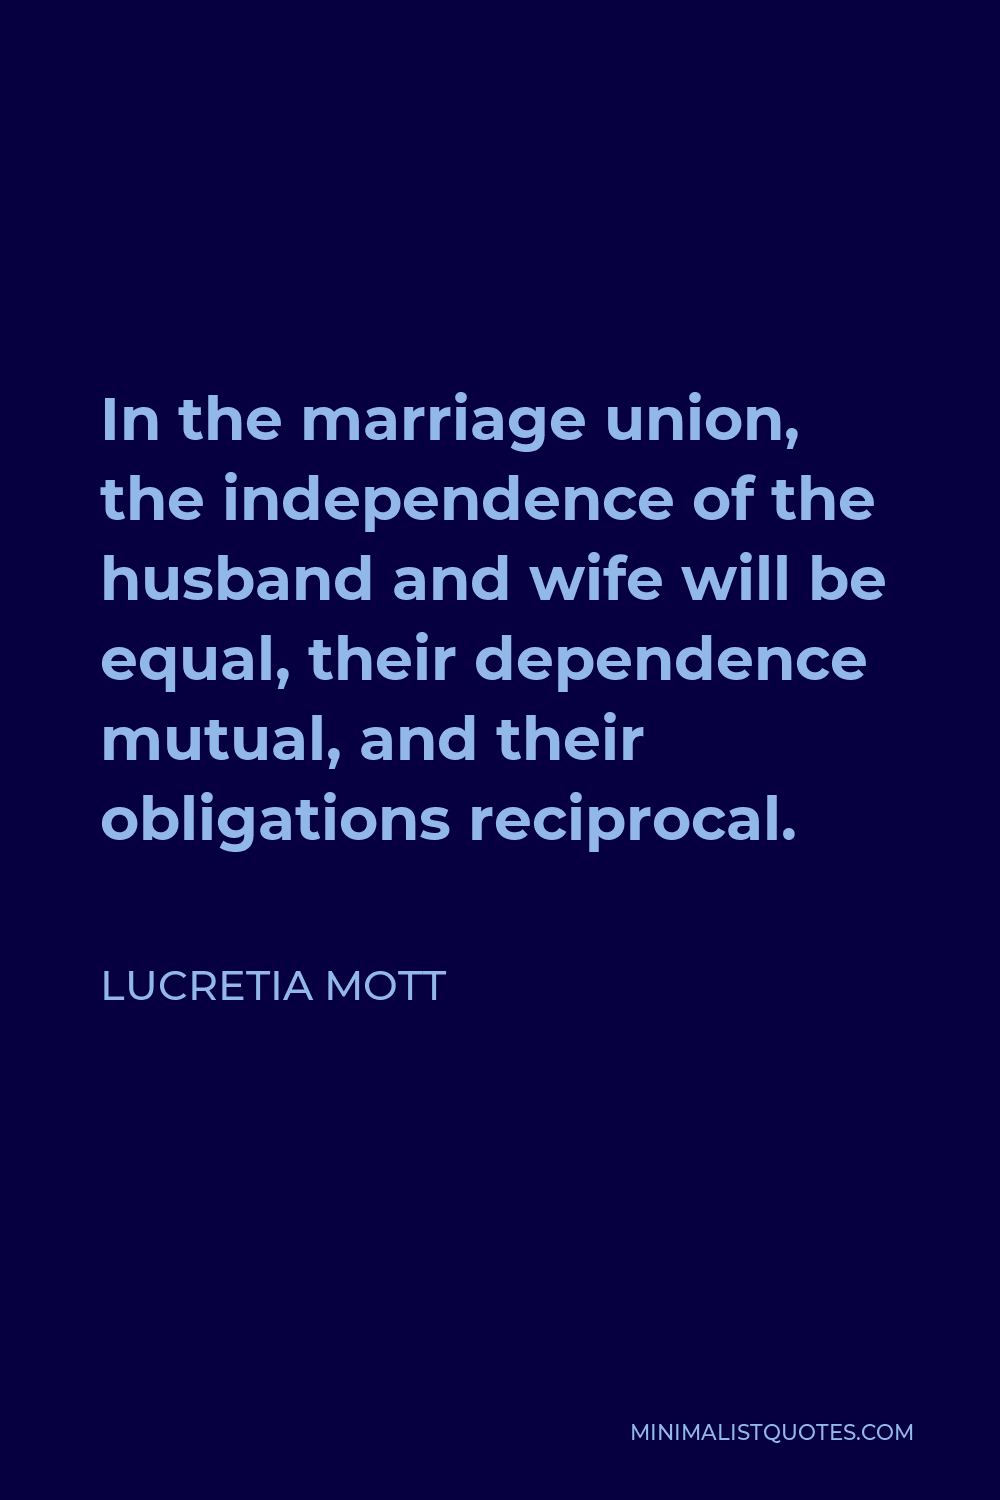 Lucretia Mott Quote - In the marriage union, the independence of the husband and wife will be equal, their dependence mutual, and their obligations reciprocal.